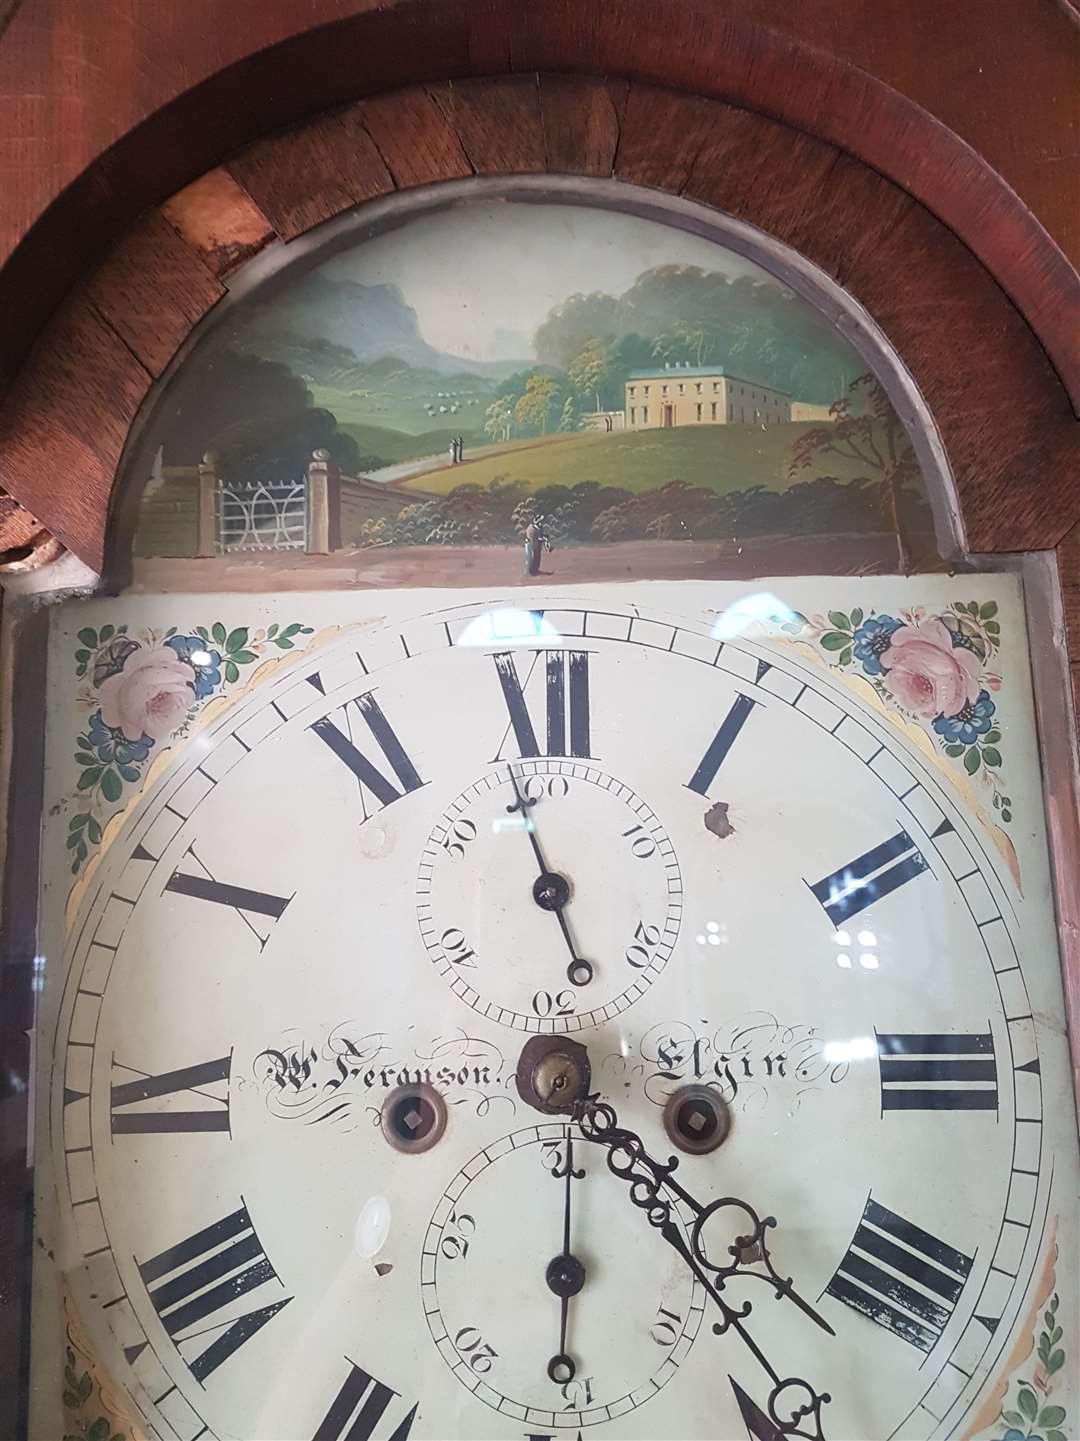 A painting of a house above the clock face remains to be identified.